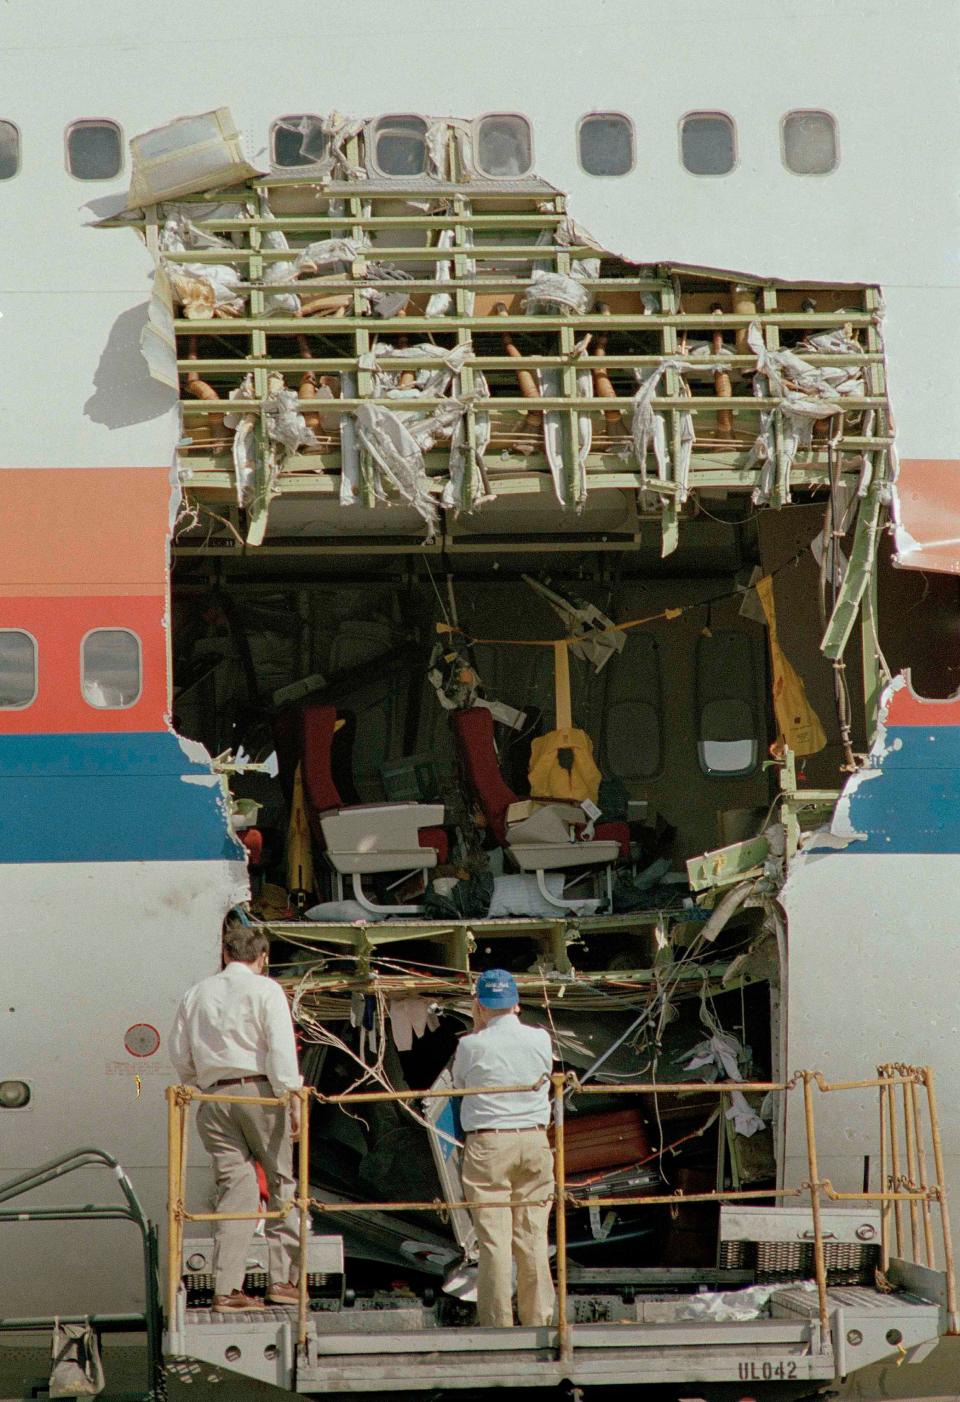 Two inspectors look at the severely damaged United Airlines Flight 811 at Honolulu Airport, Feb. 26, 1989.